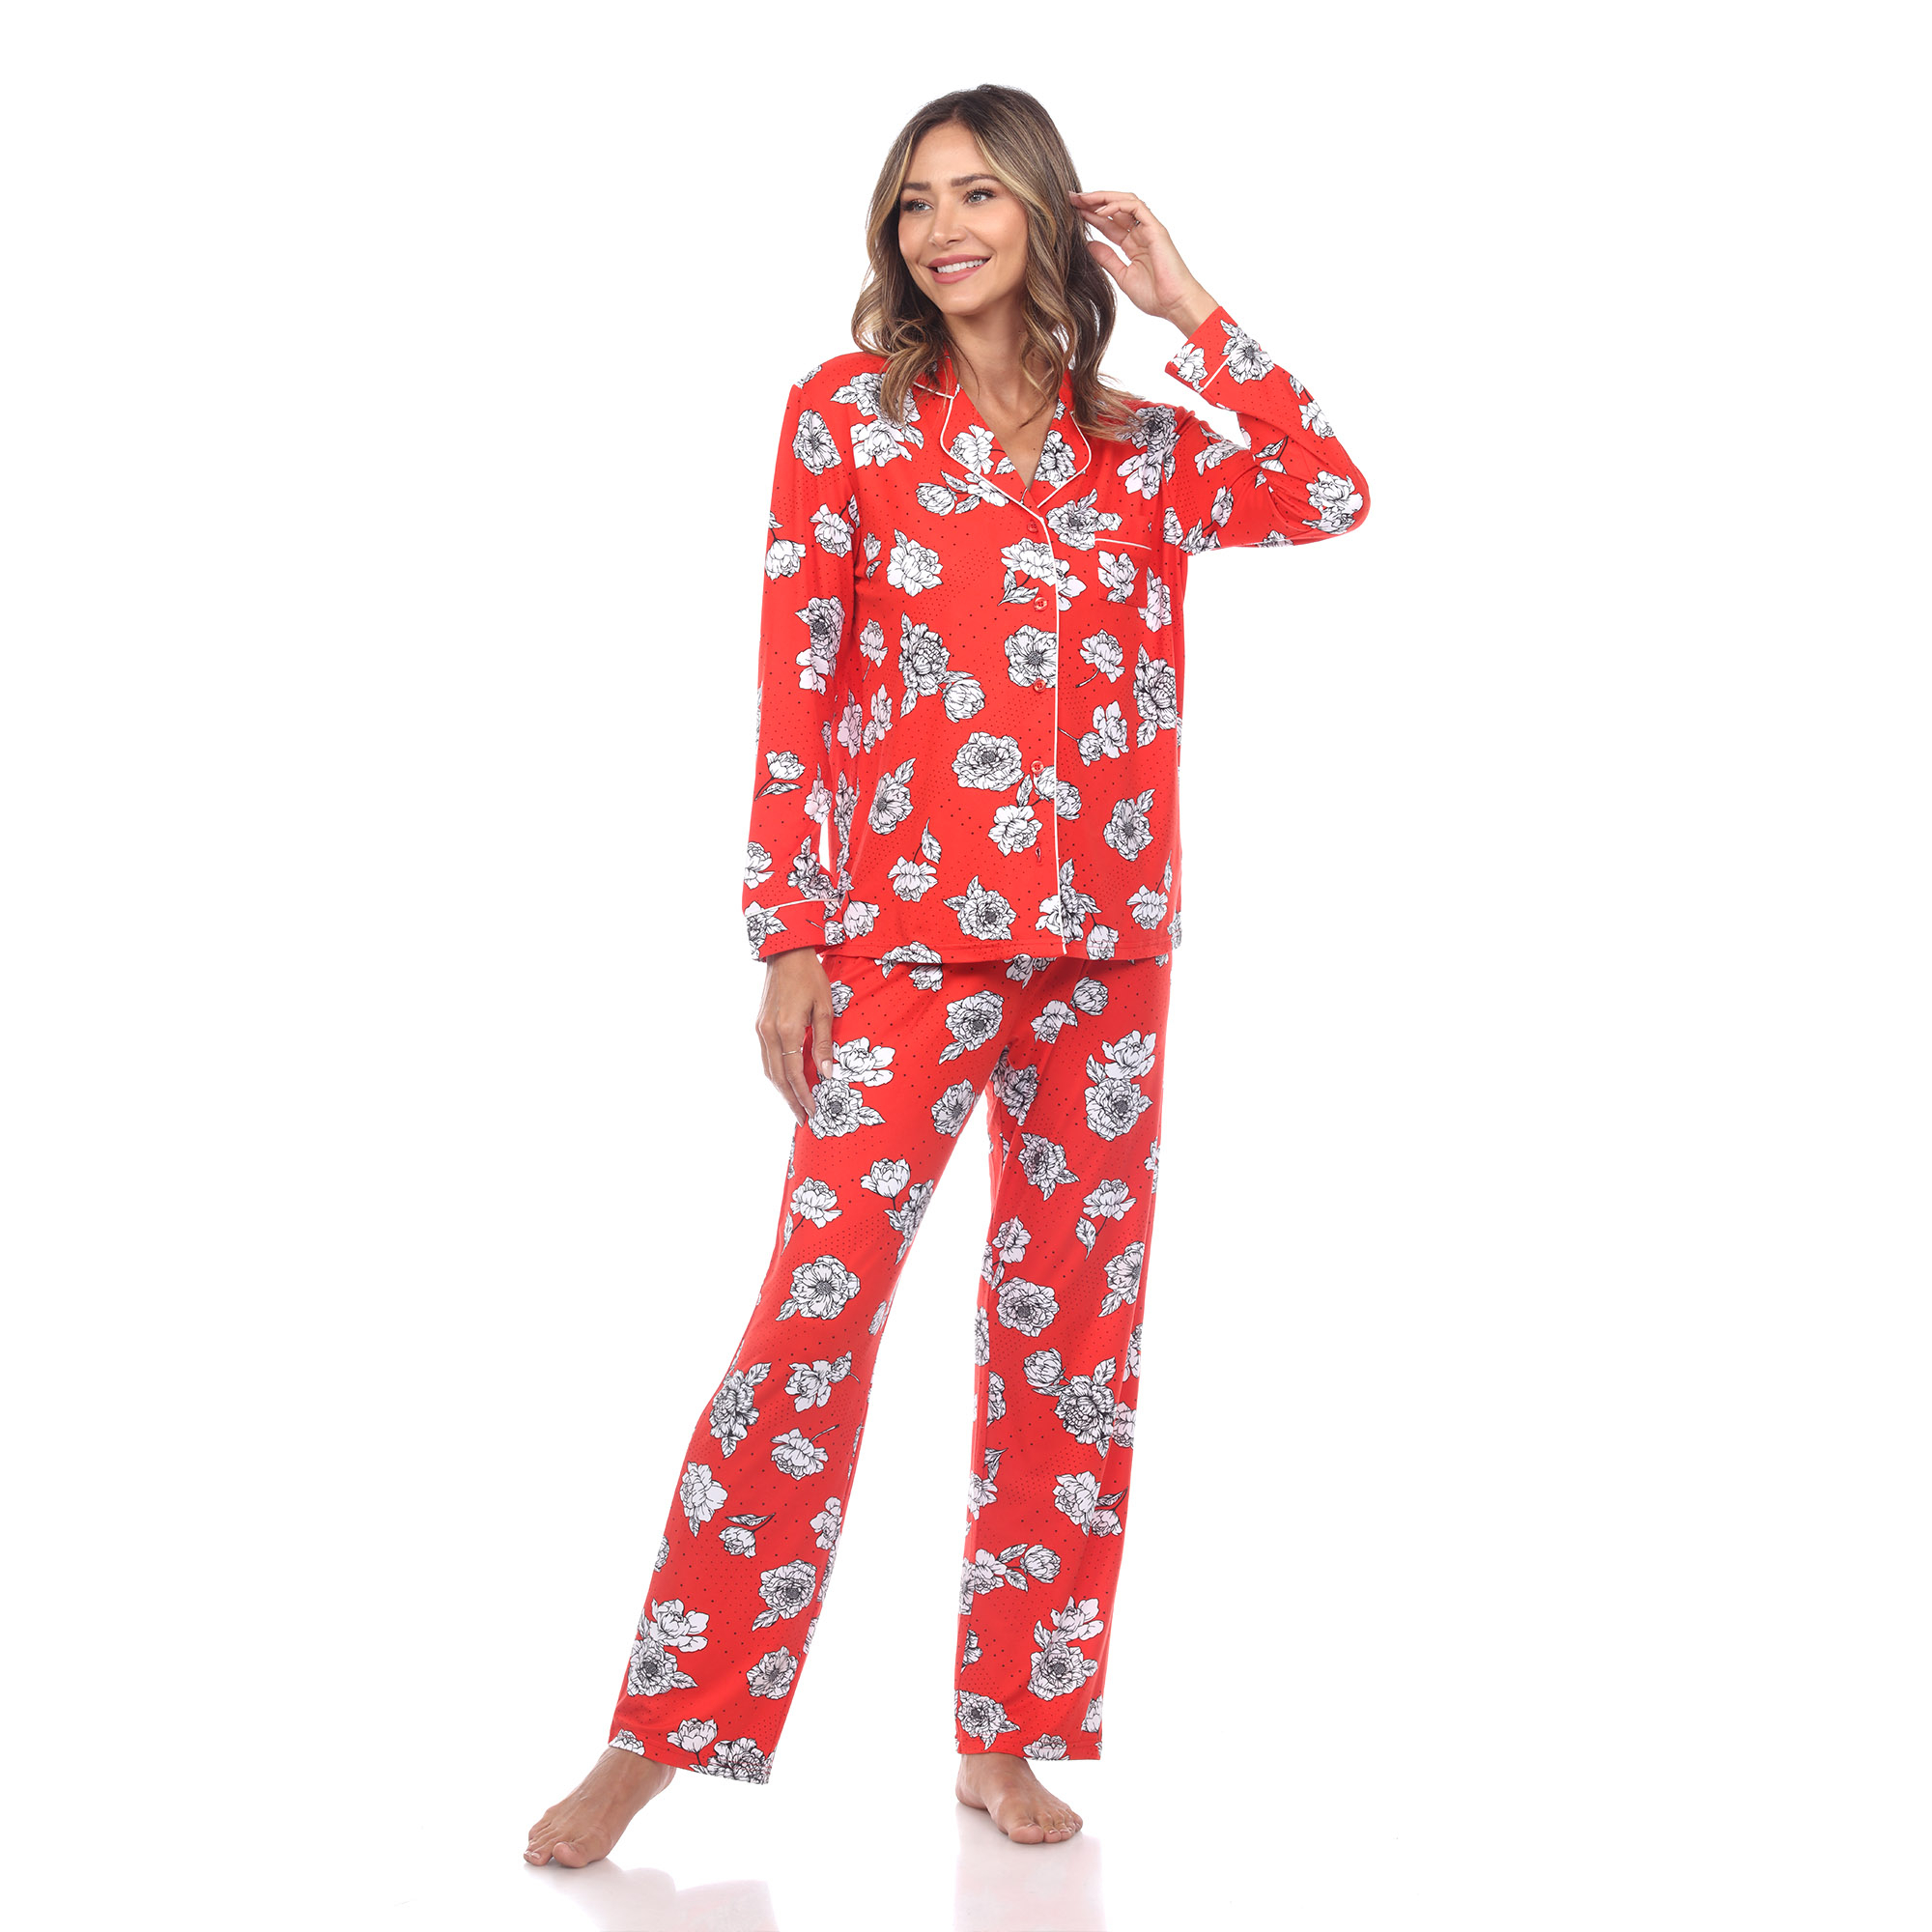 White Mark Women's Long Sleeve Floral Pajama Set - Red, 2X